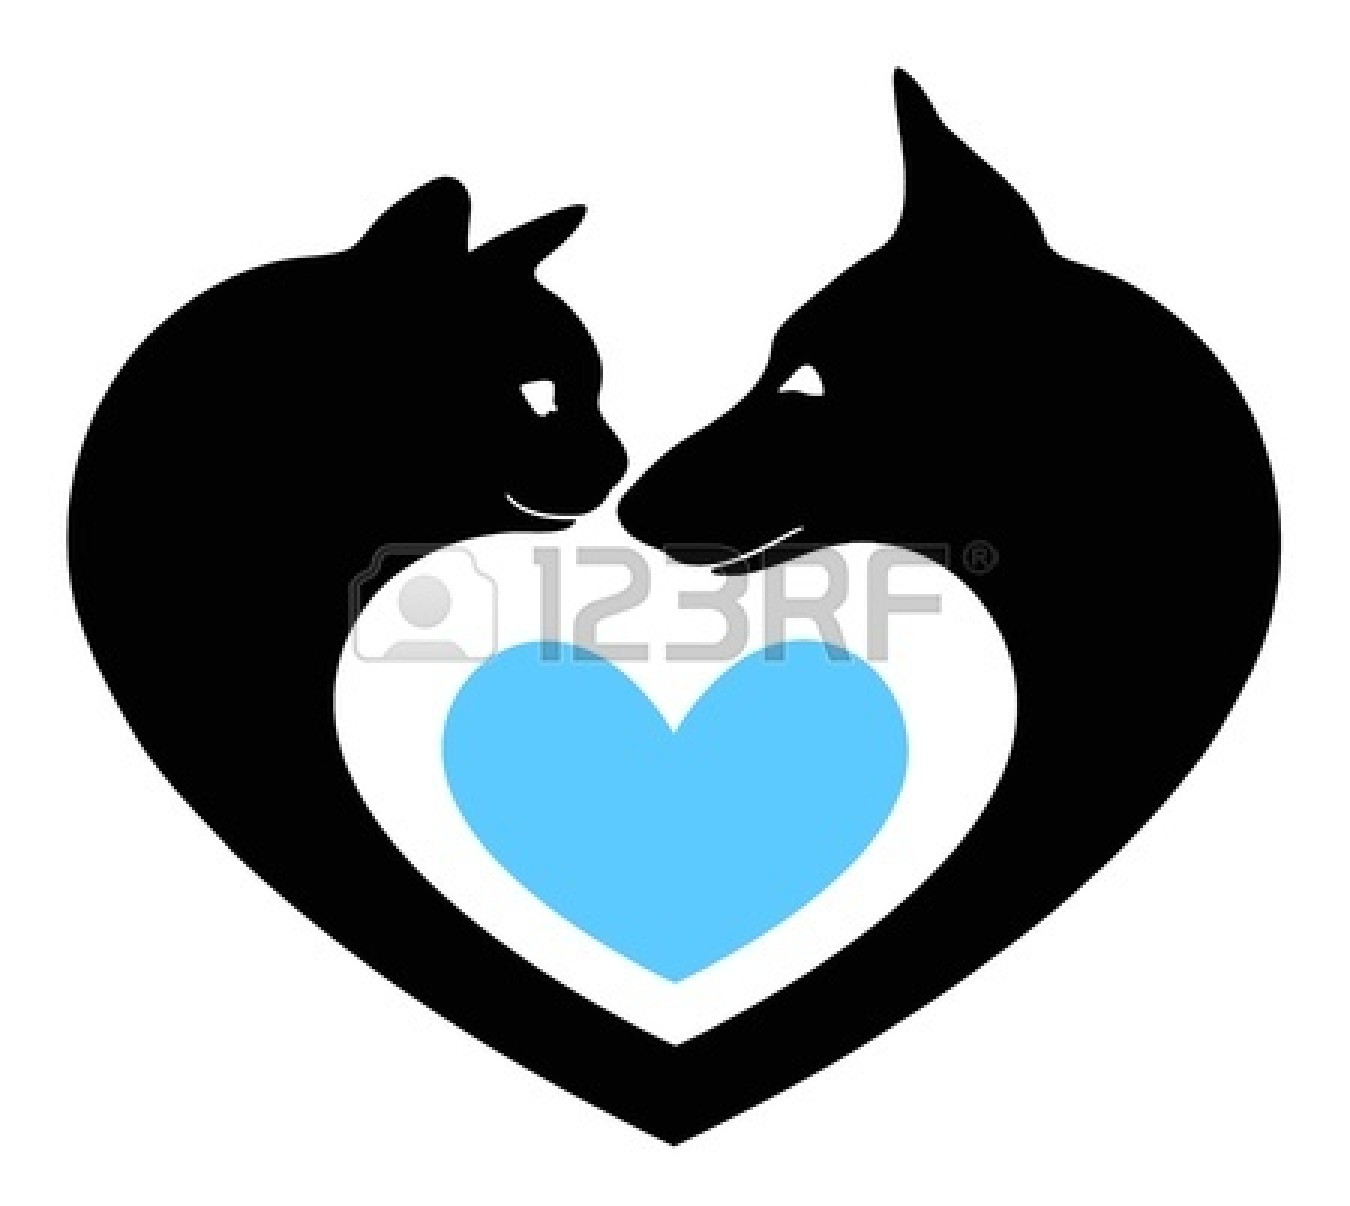 And Cat Silhouette With Heart 18826097 Cat And Dog In The Heart Jpg